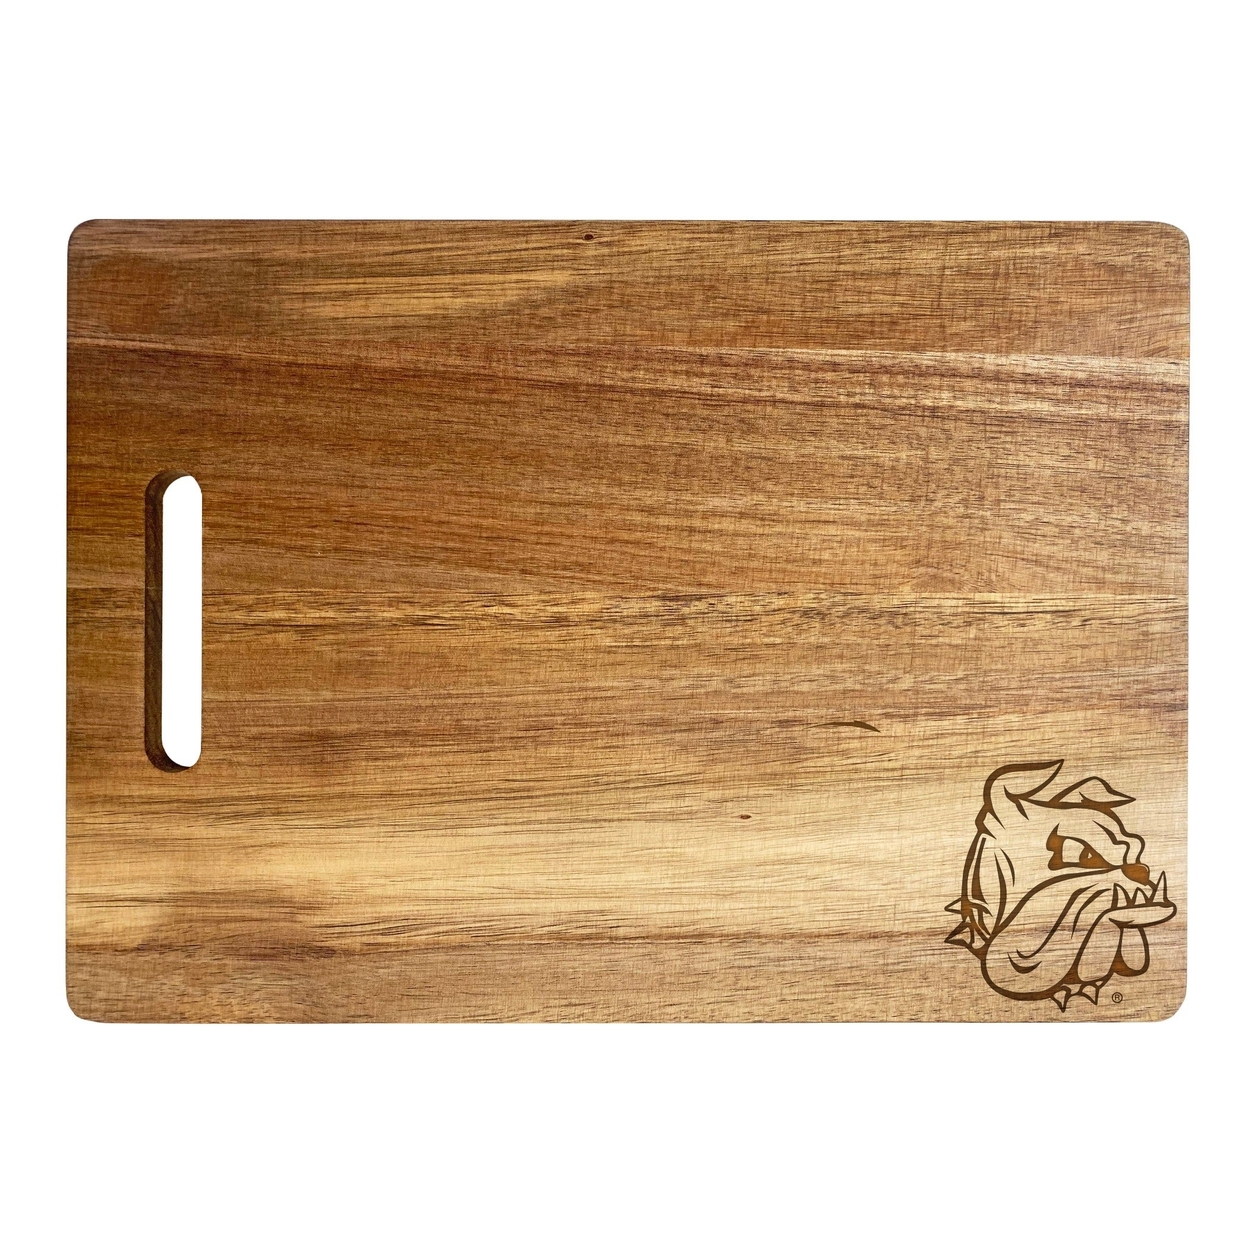 Minnesota Duluth Bulldogs Engraved Wooden Cutting Board 10 X 14 Acacia Wood - Small Engraving